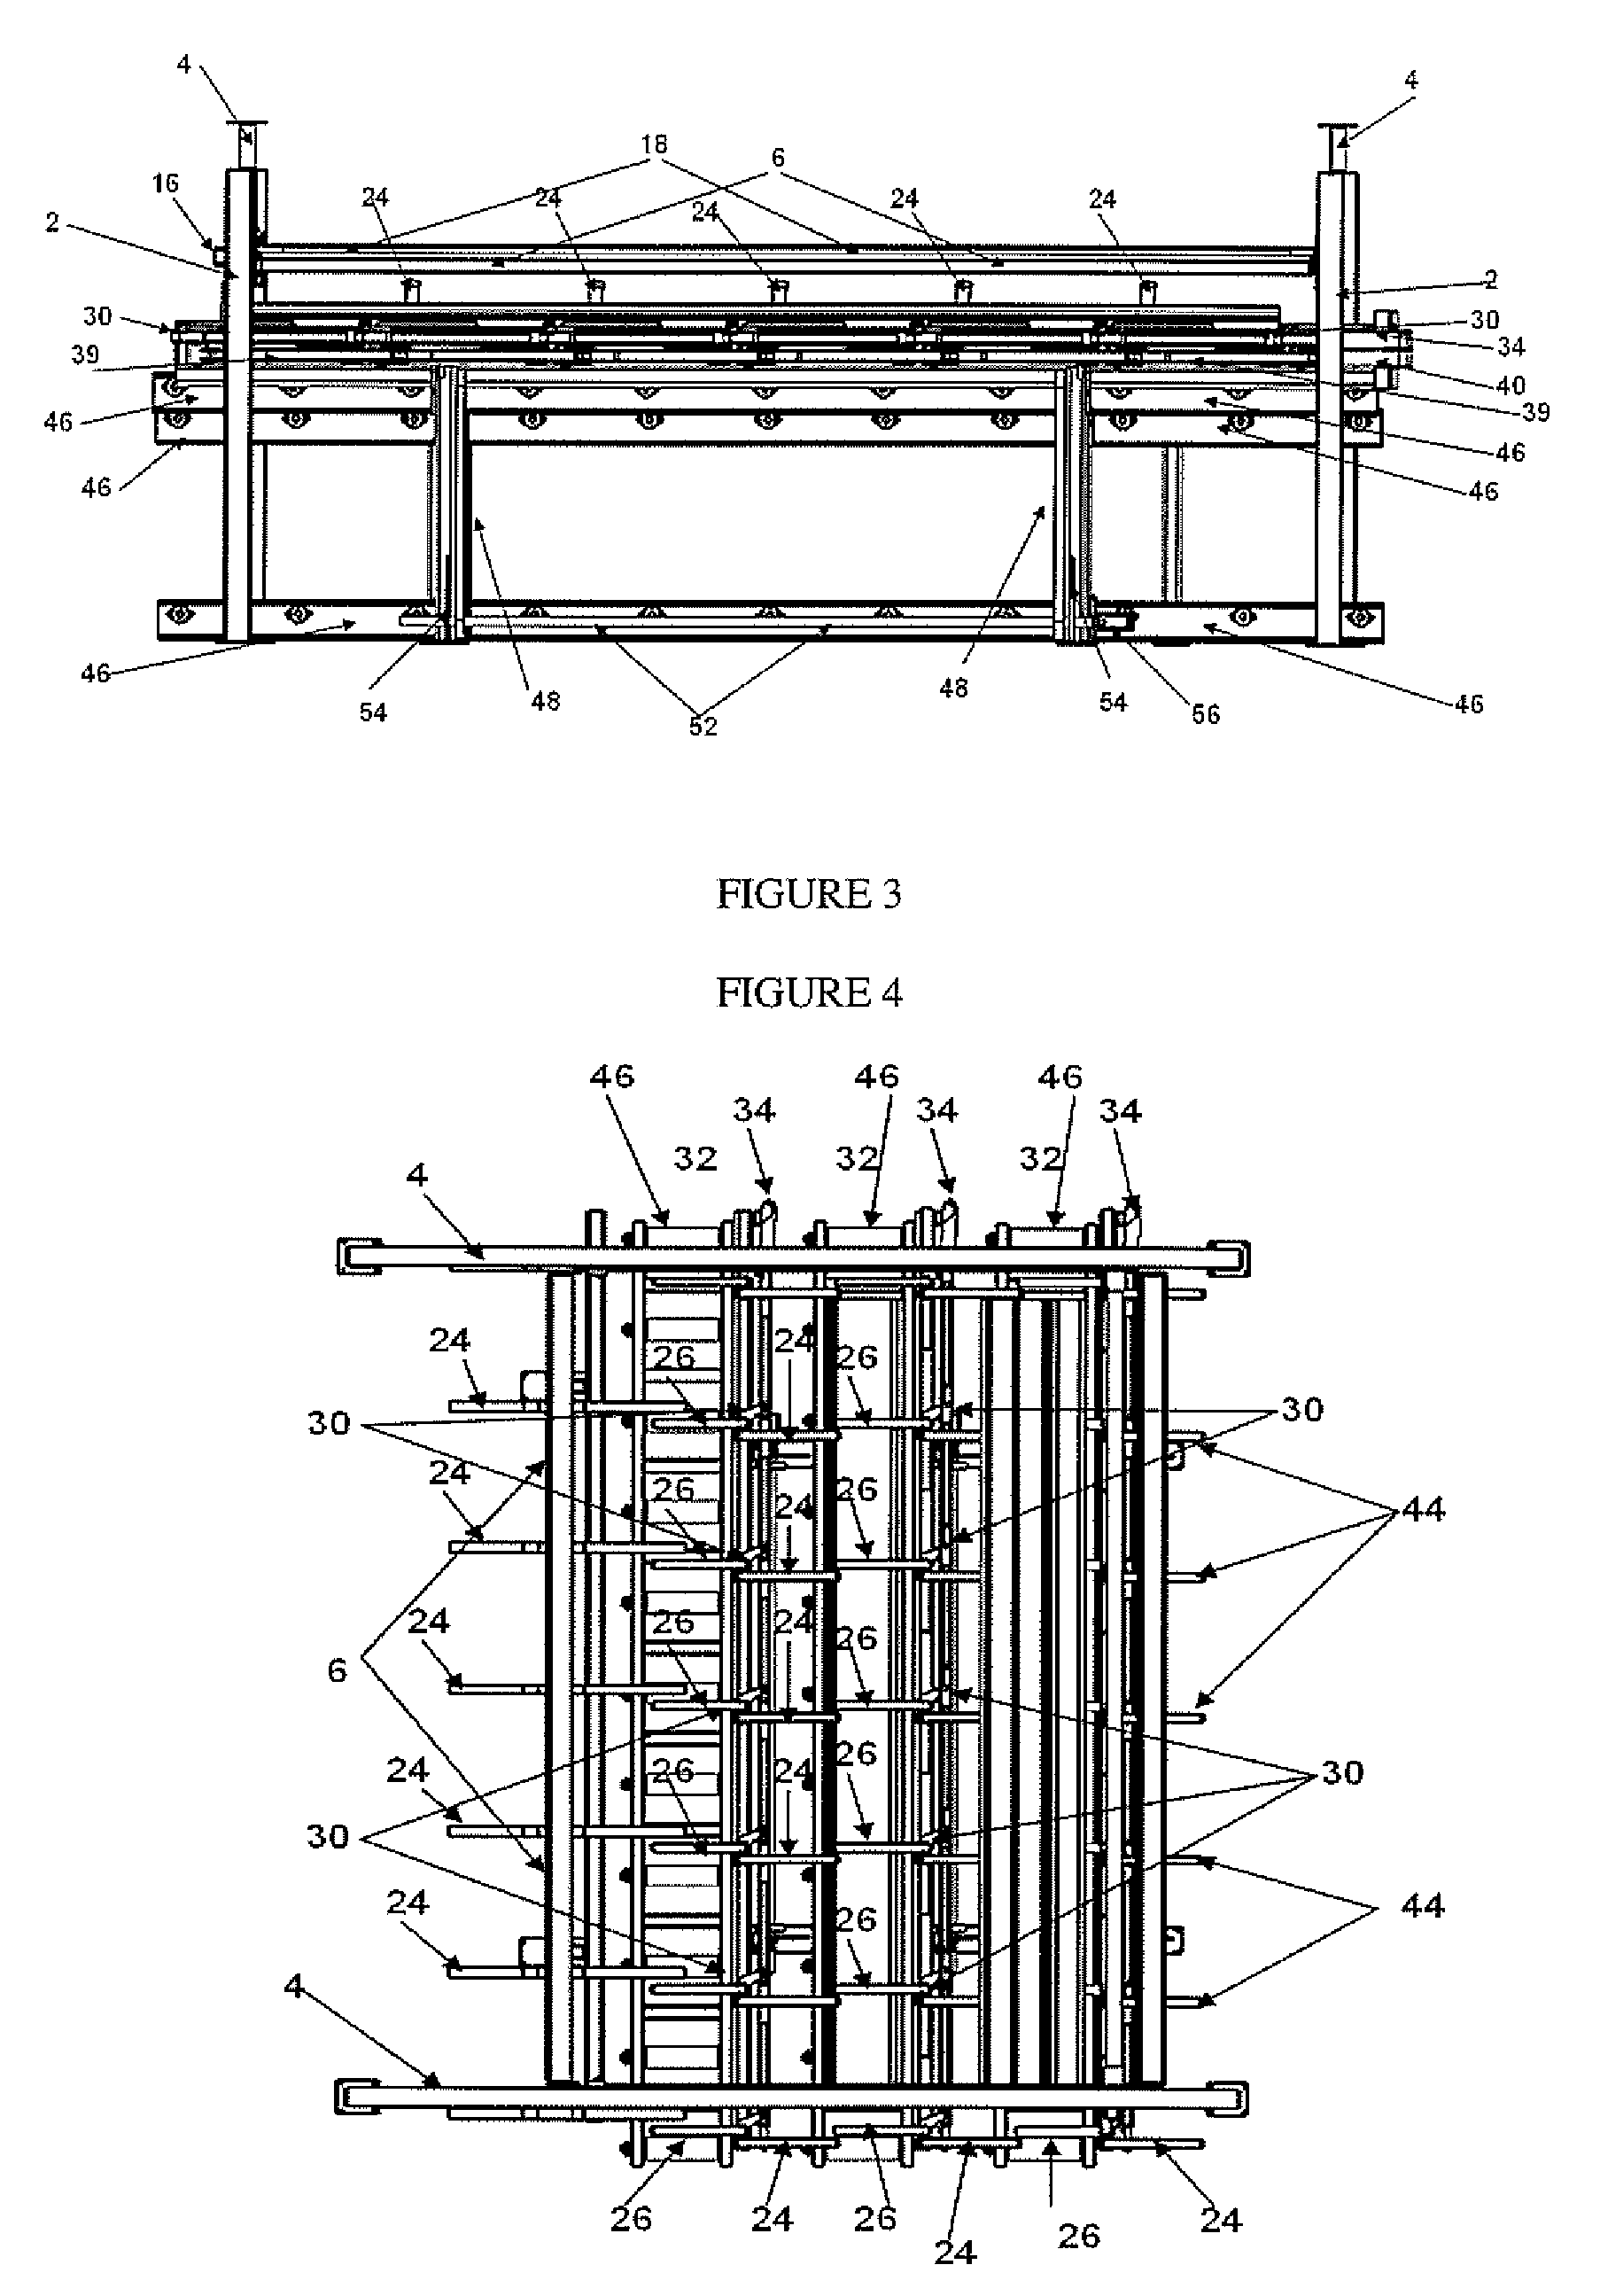 Method for sorting engineered wood products